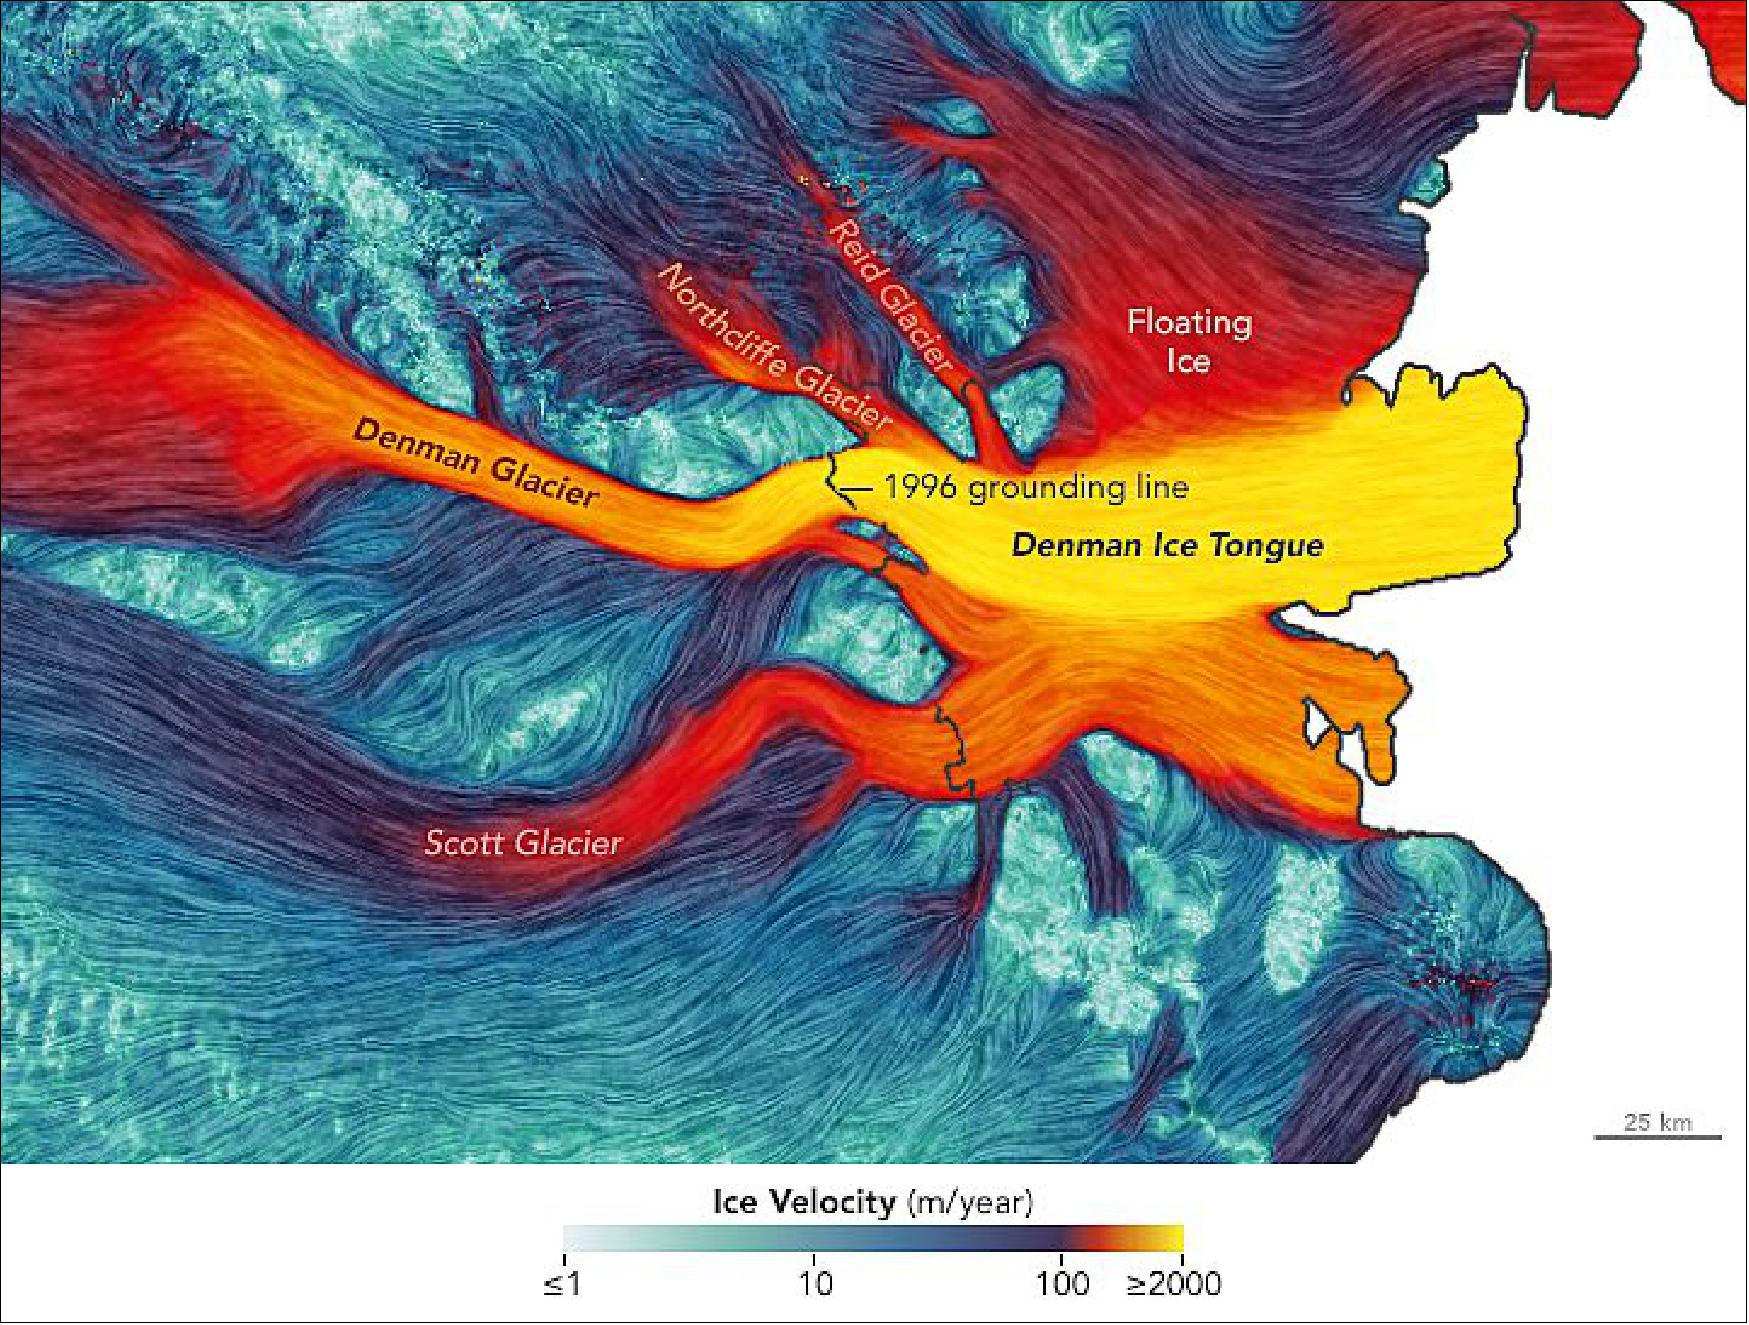 Figure 90: This map depicts the velocity of the ice surfaces on and around Denman Glacier, as measured by the JPL/UCI team. Ice flows from left (grounded ice) to right (floating ice) in the image. About 24,000 km2 (9,000 square miles) of Denman floats on the ocean, mostly on the Shackleton Ice Shelf and Denman Ice Tongue. That floating ice has been melting from the bottom up at a rate of about 3 meters annually. These measurements, as well as the grounding line and seafloor measurements above, were made through the use of synthetic aperture radar data from the German Aerospace Center’s TanDEM-X satellite and the Italian COSMO-SkyMed satellites, as well laser altimetry data from NASA’s Operation IceBridge (image credit: NASA Earth Observatory)